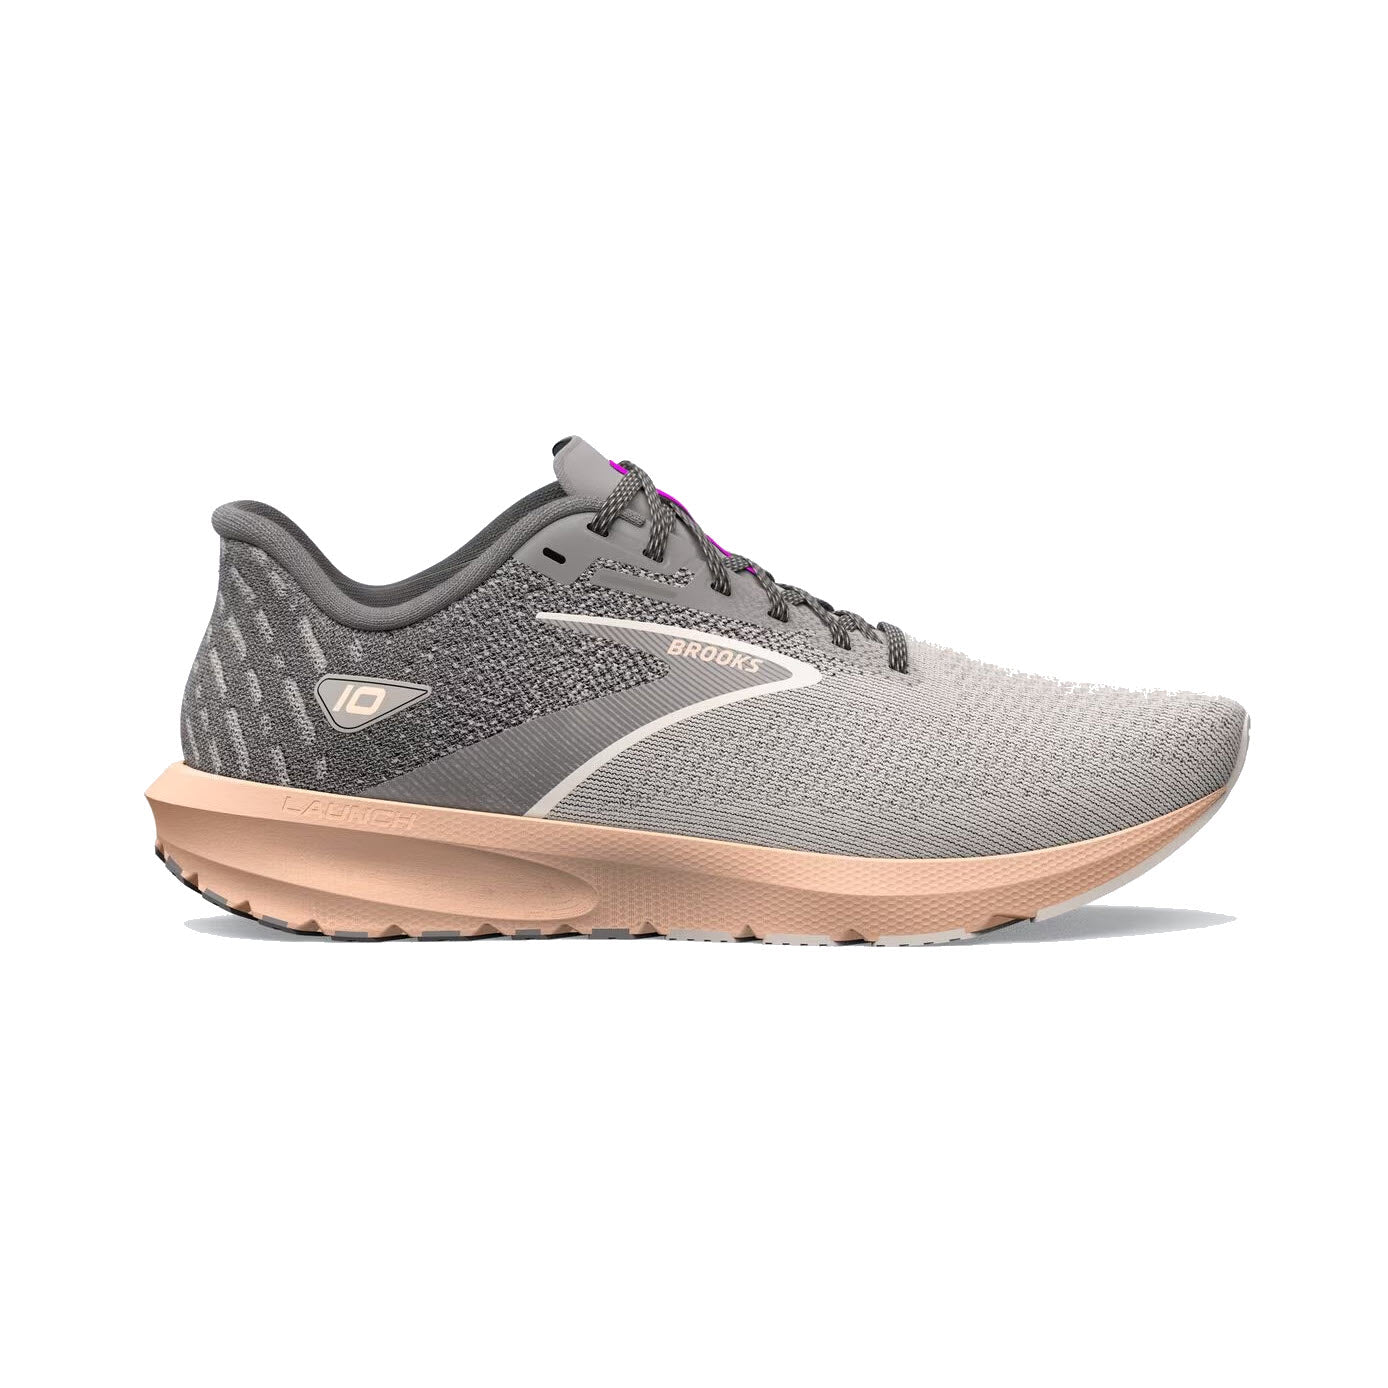 A single Brooks Launch 10 running shoe with a grey knitted upper and beige sole, featuring responsive cushioning and the logo on the side.